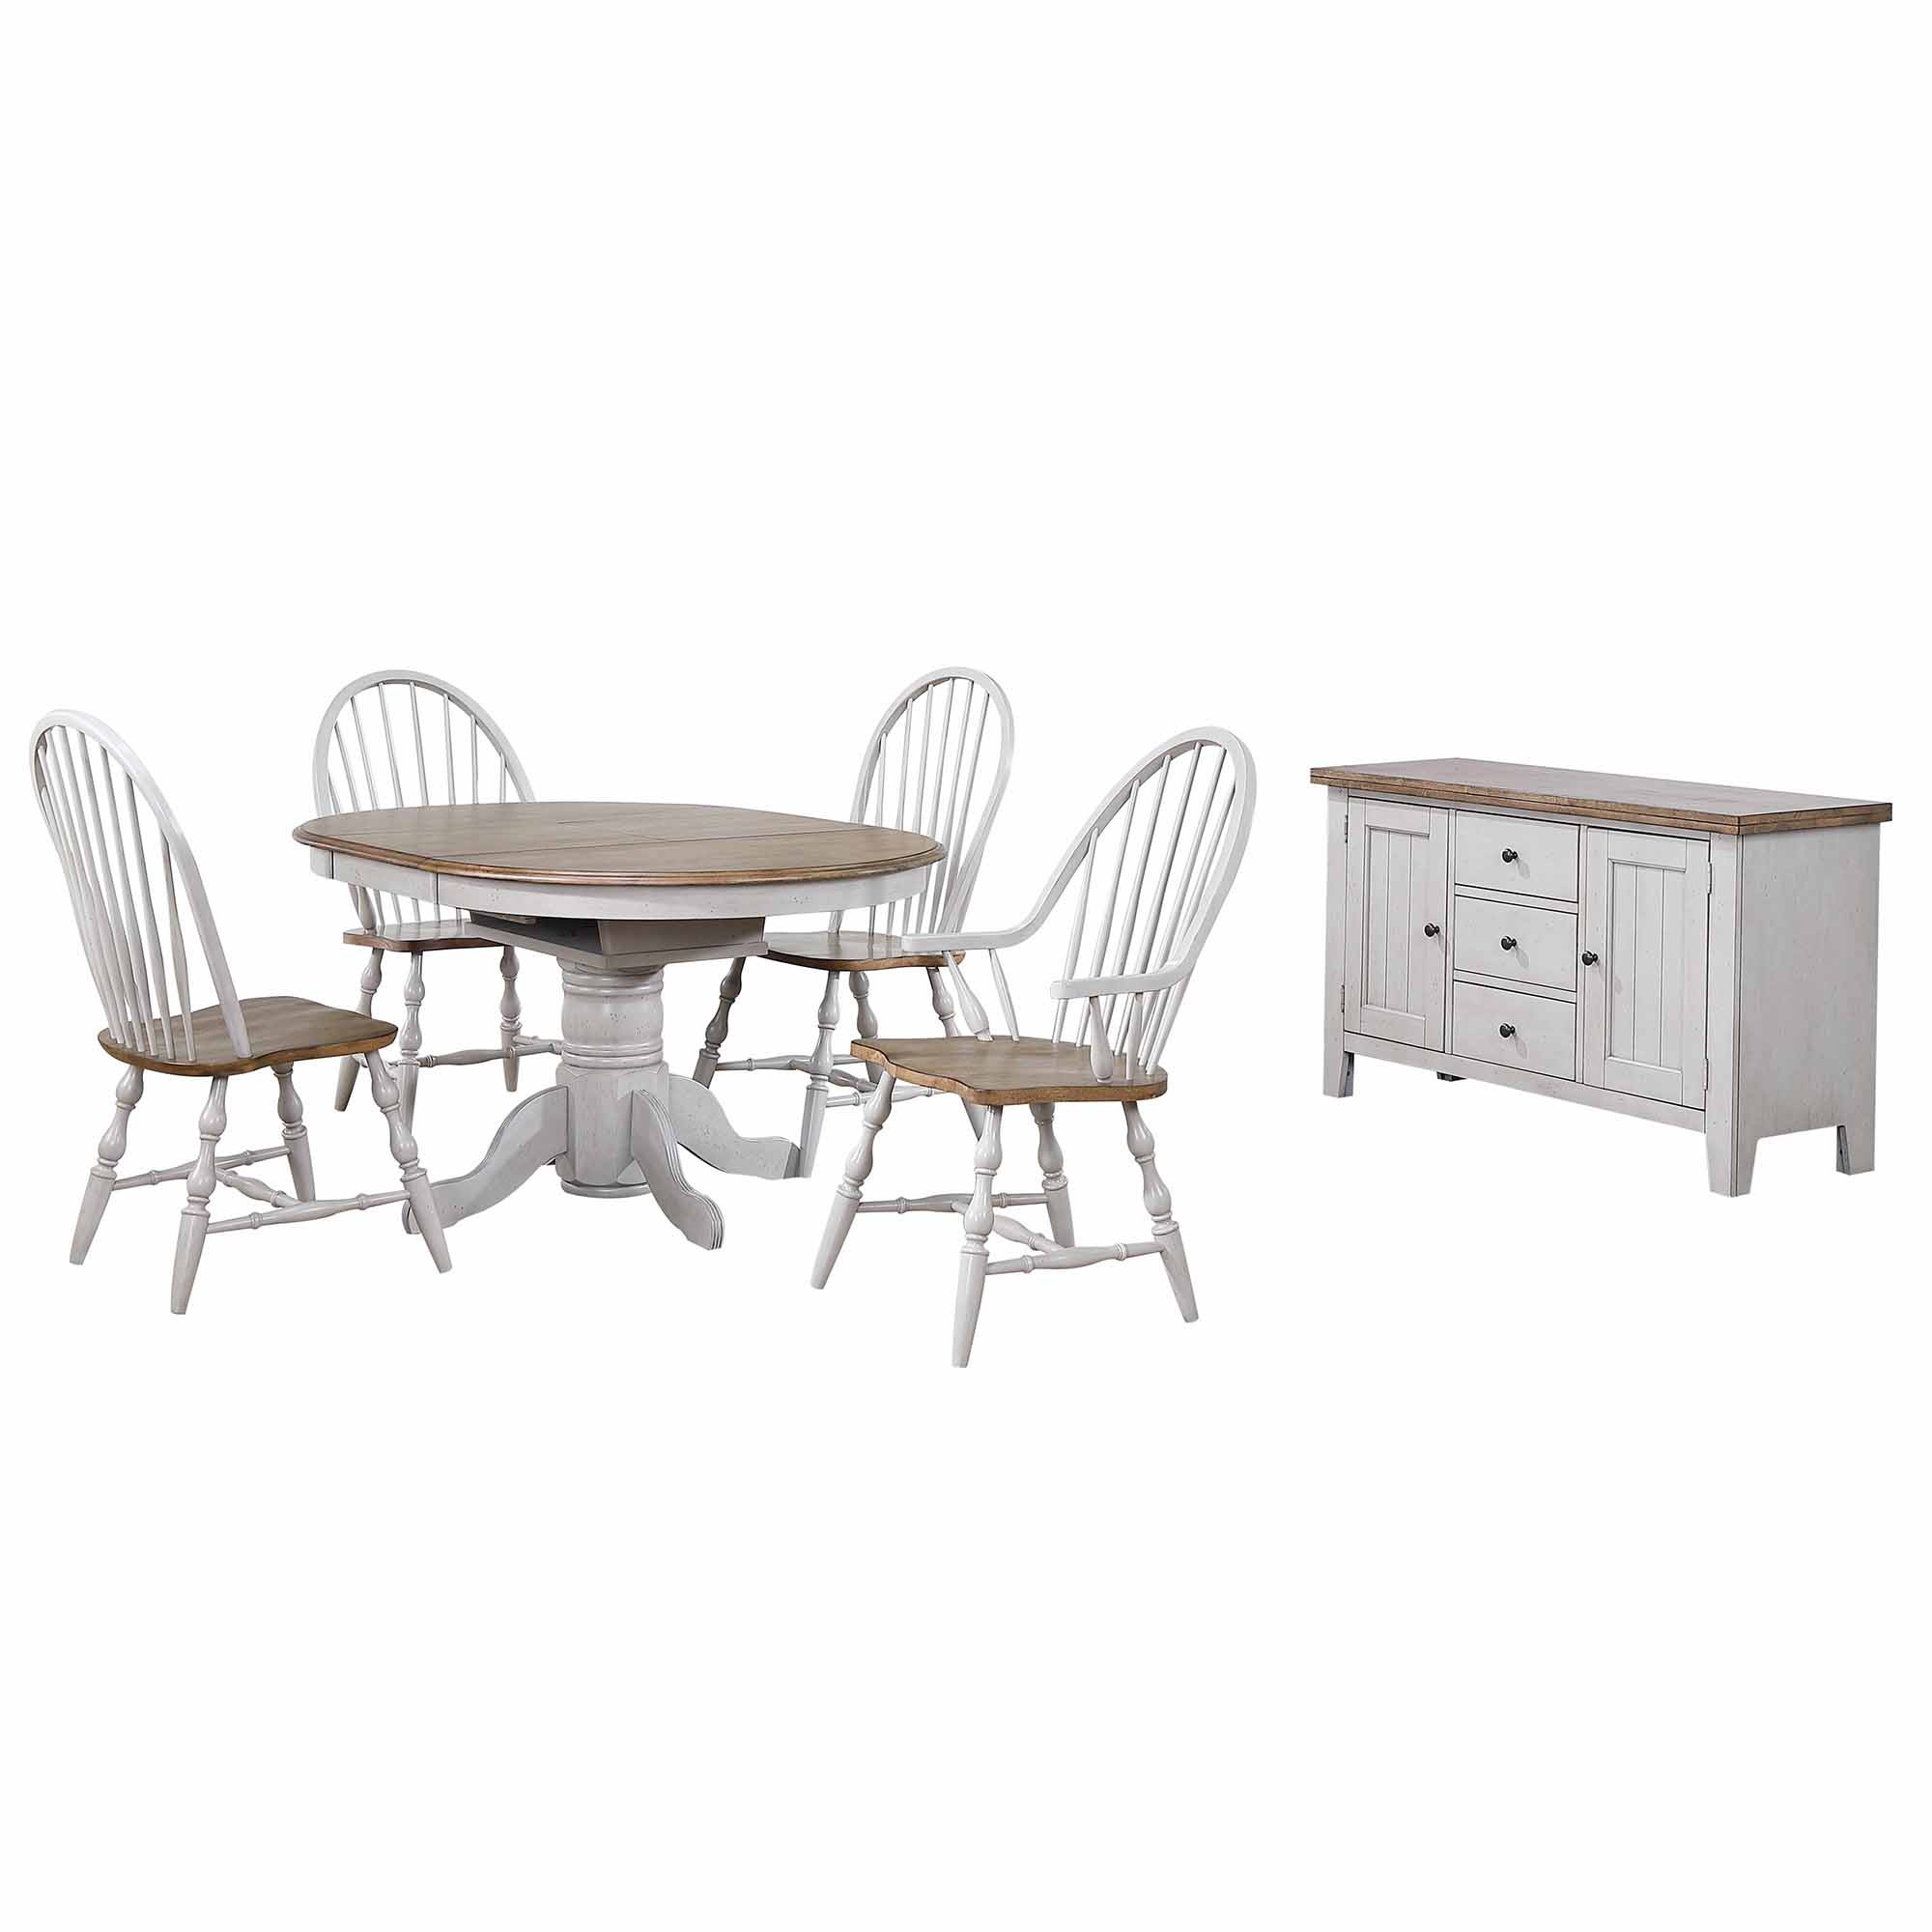 Oval Extendable Dining Table Set, Distressed Round Kitchen Table And Chairs